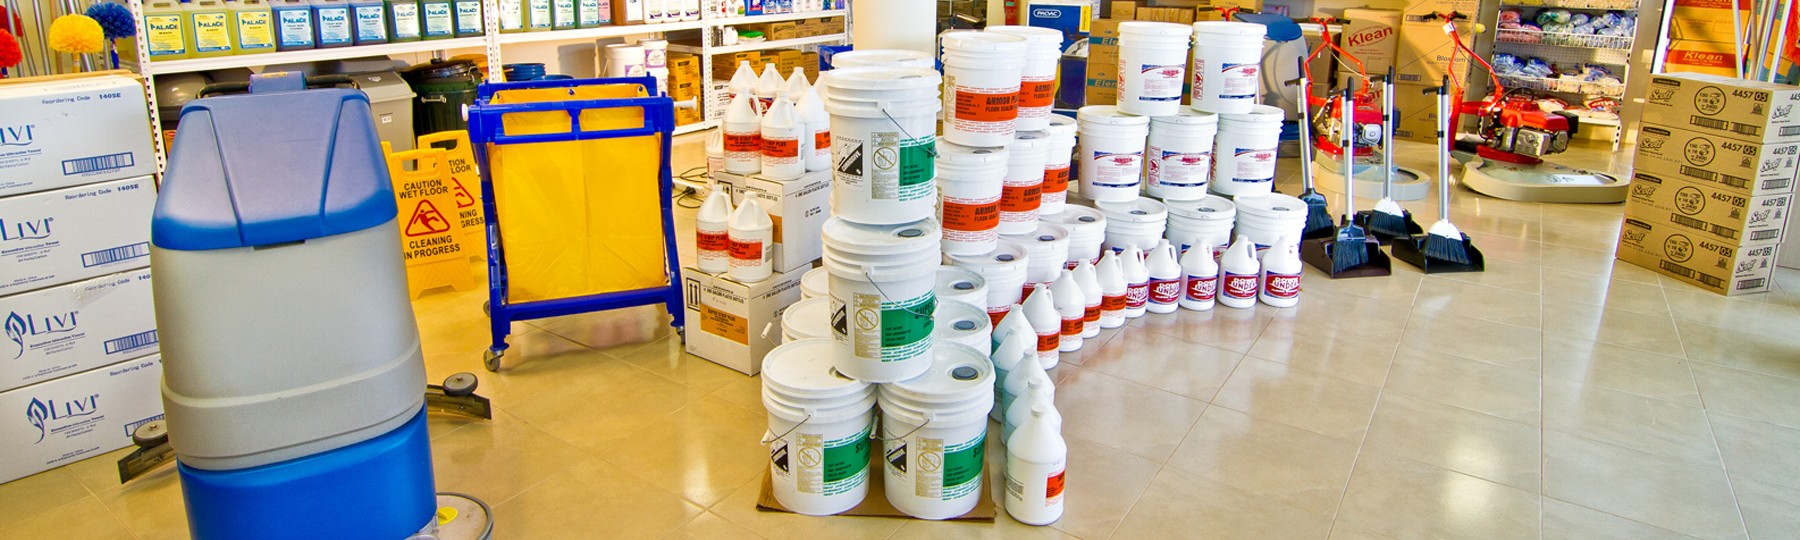 Commercial Cleaning Supplies Melbourne